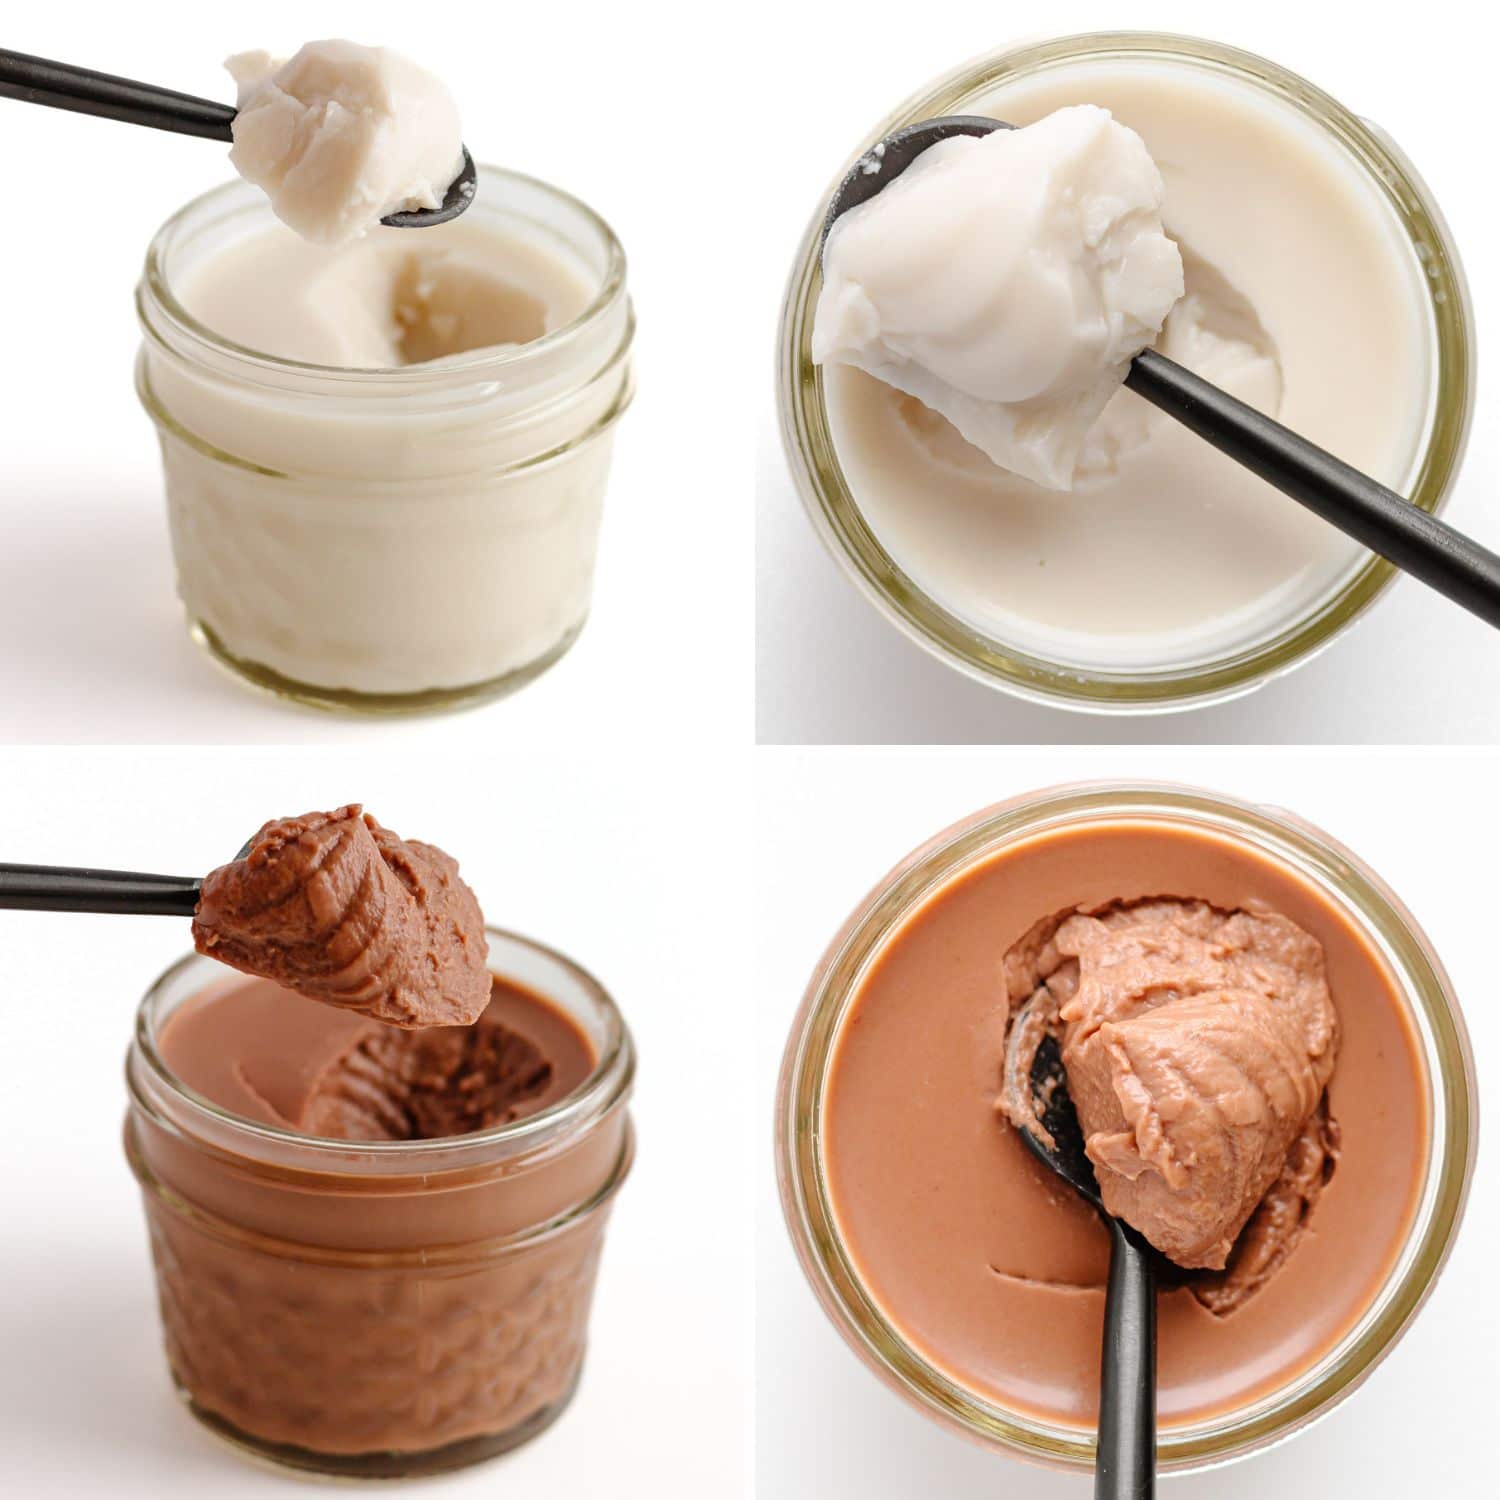 Collage showing set vanilla and chocolate coconut jelly being scooped out of a jar with a spoon.